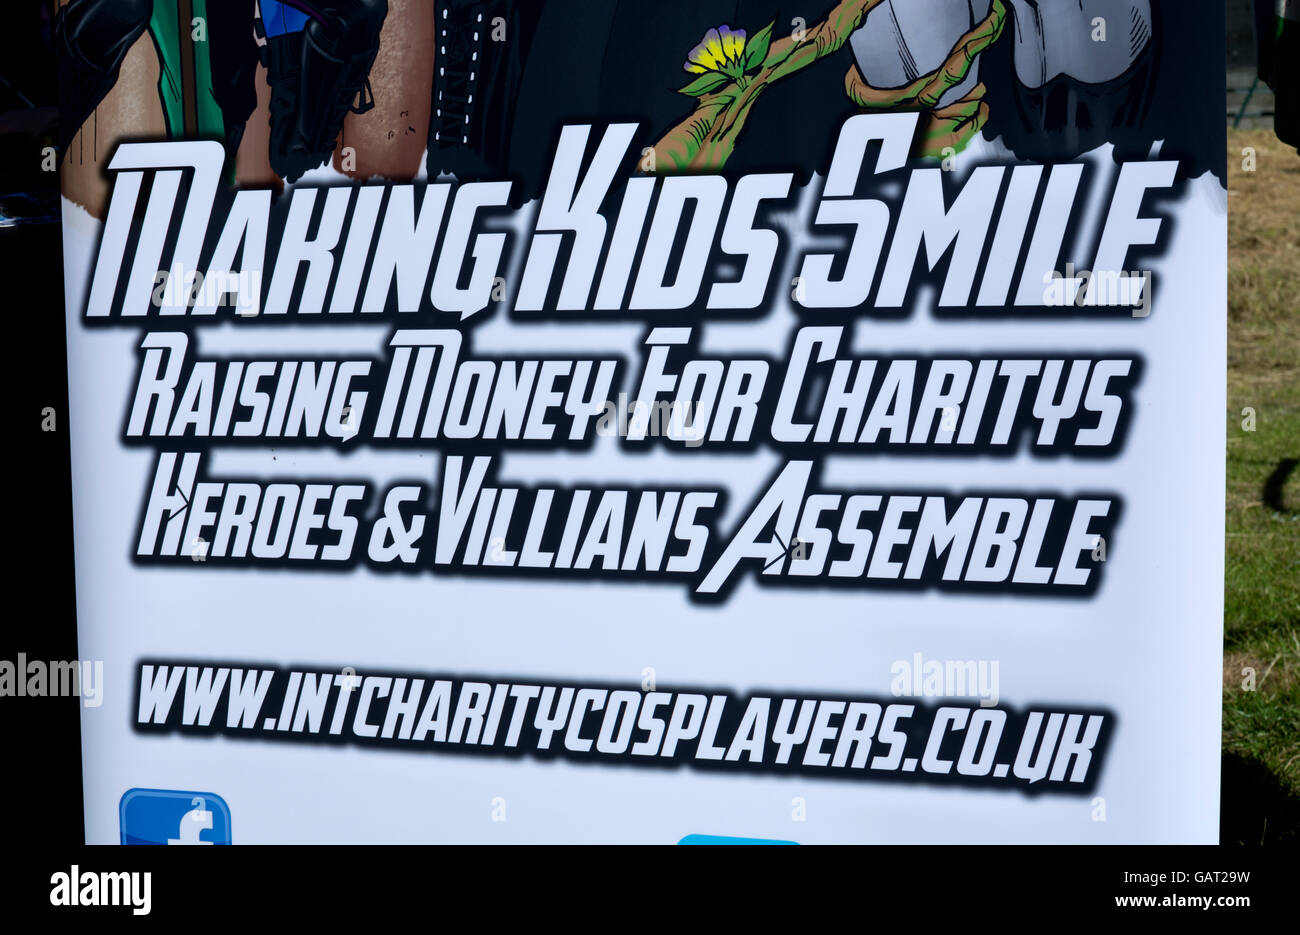 Spelling mistake on a sign, charitys instead of charities. Stock Photo